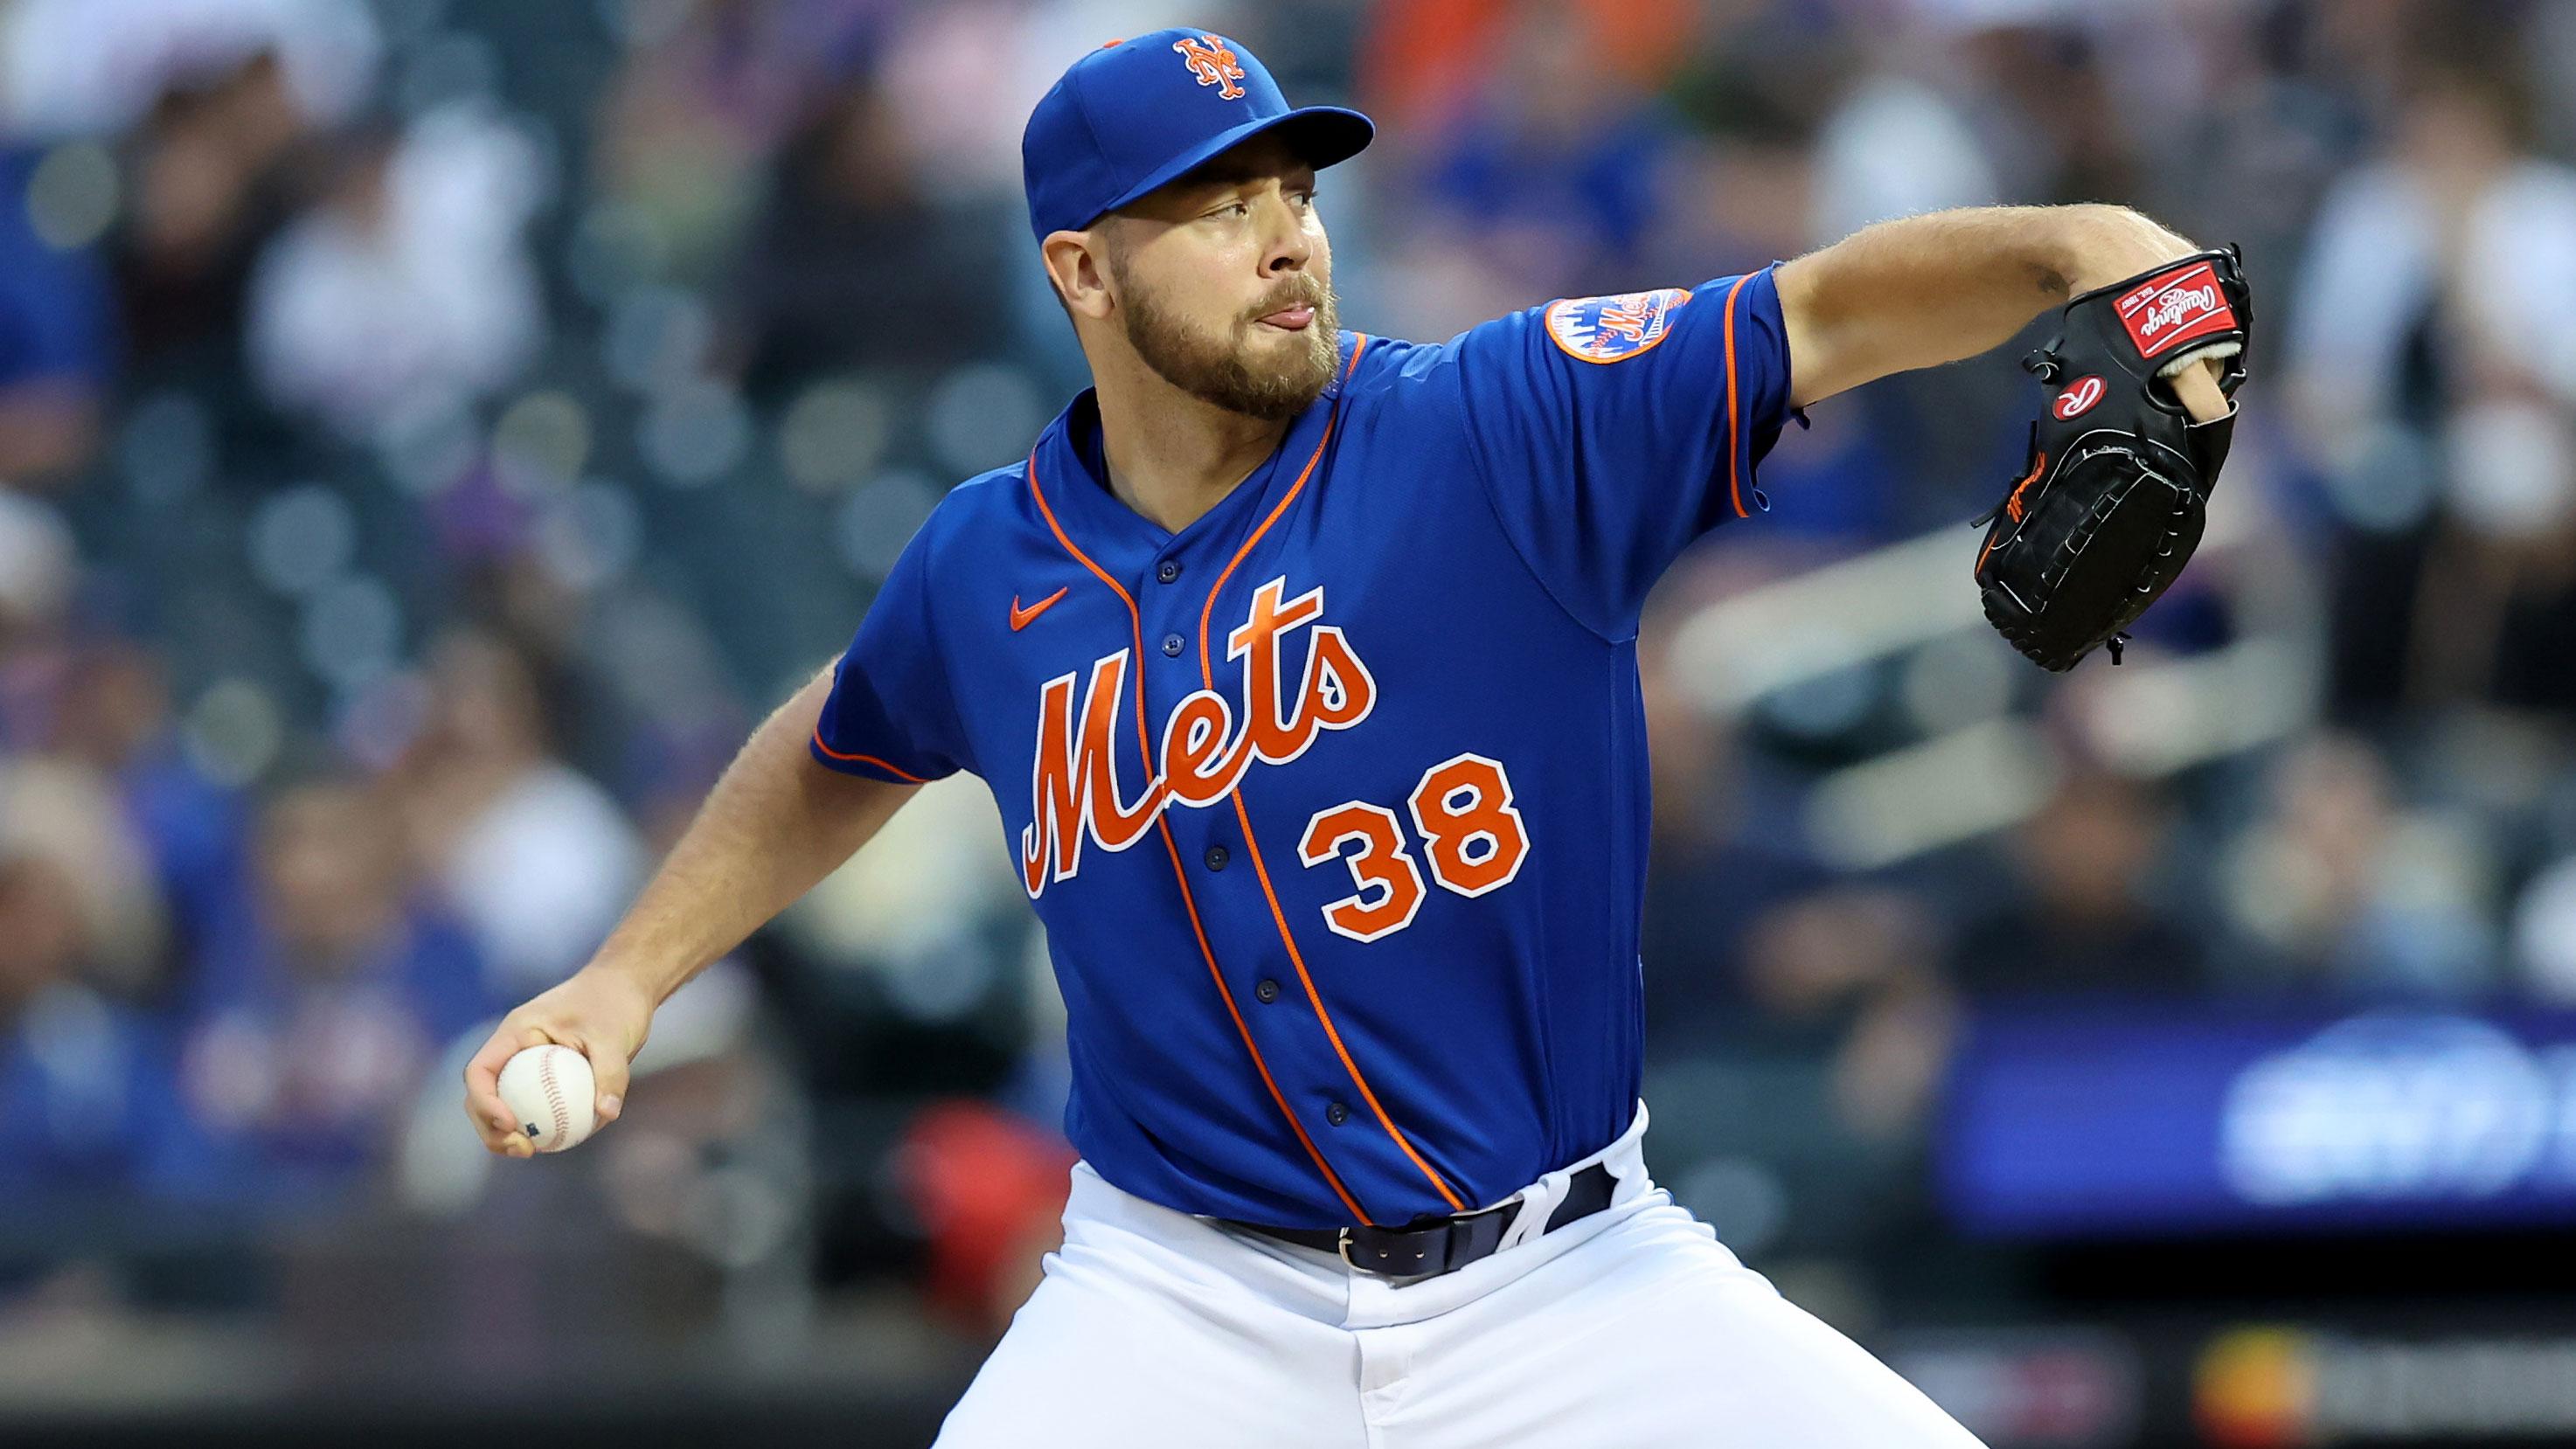 Jun 16, 2022; New York City, New York, USA; New York Mets starting pitcher Tylor Megill (38) pitches against the Milwaukee Brewers during the second inning at Citi Field. / Brad Penner-USA TODAY Sports